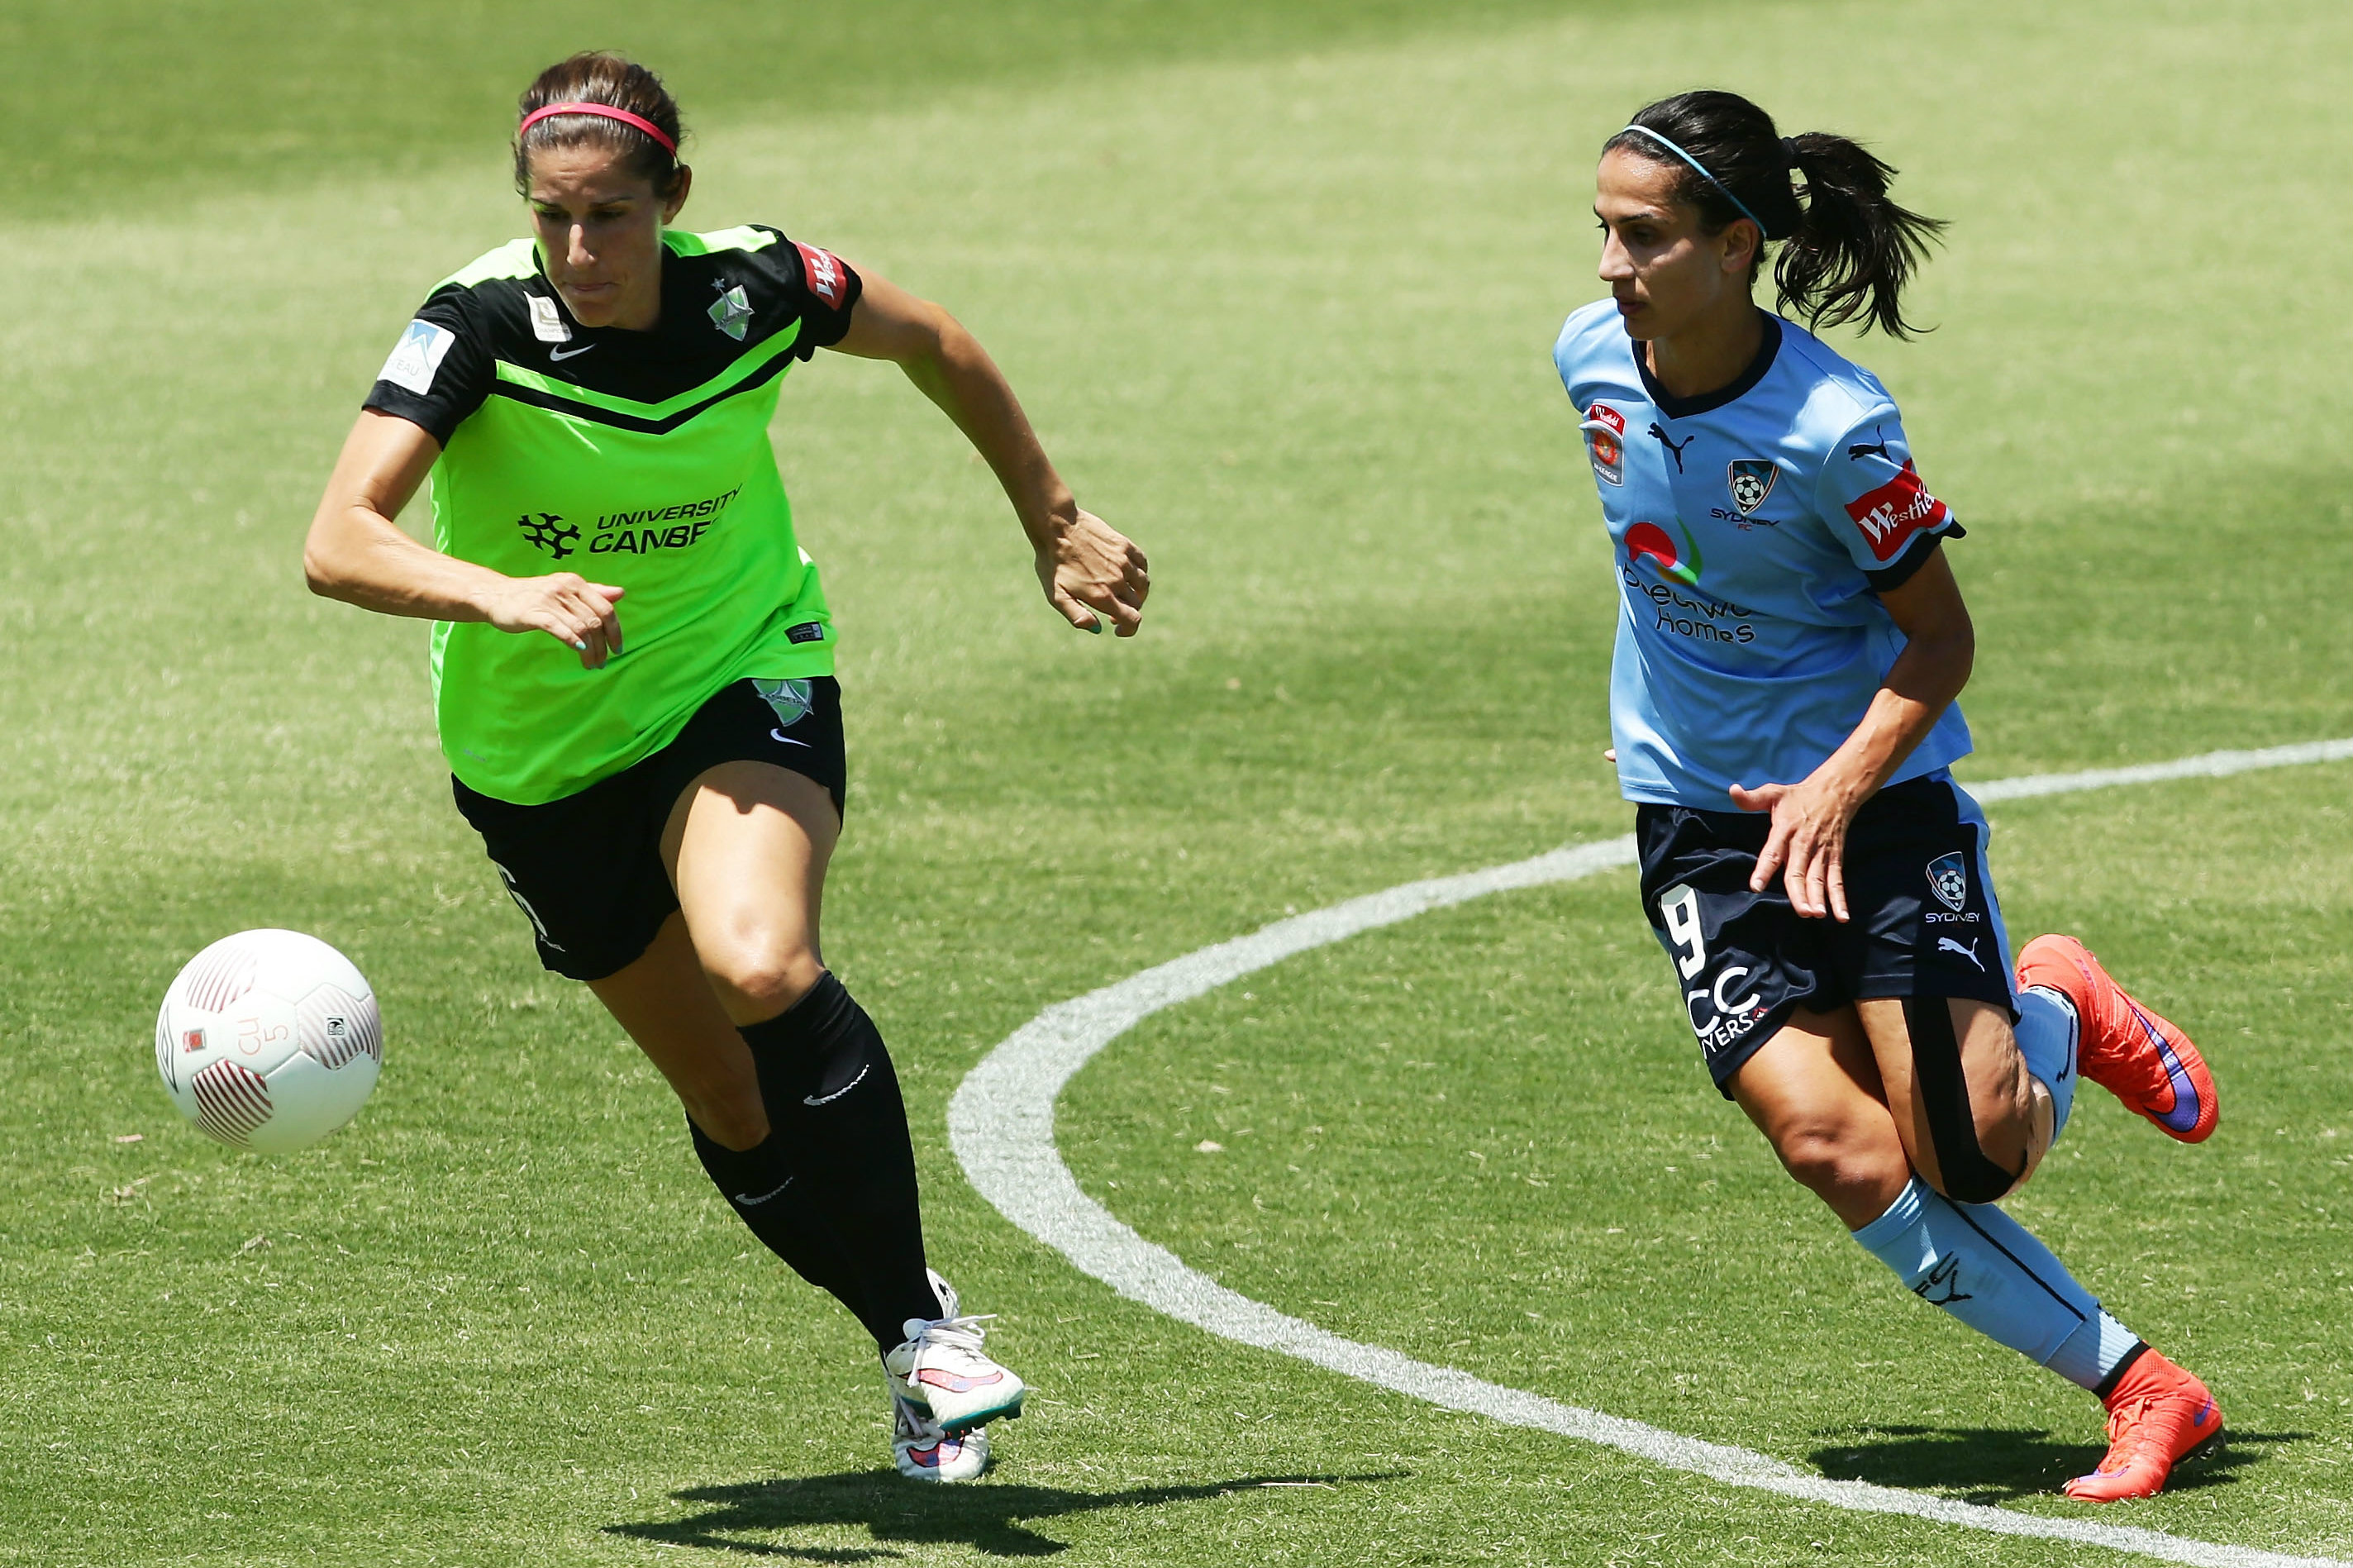 Munoz won two Championships and two Premierships with Canberra United